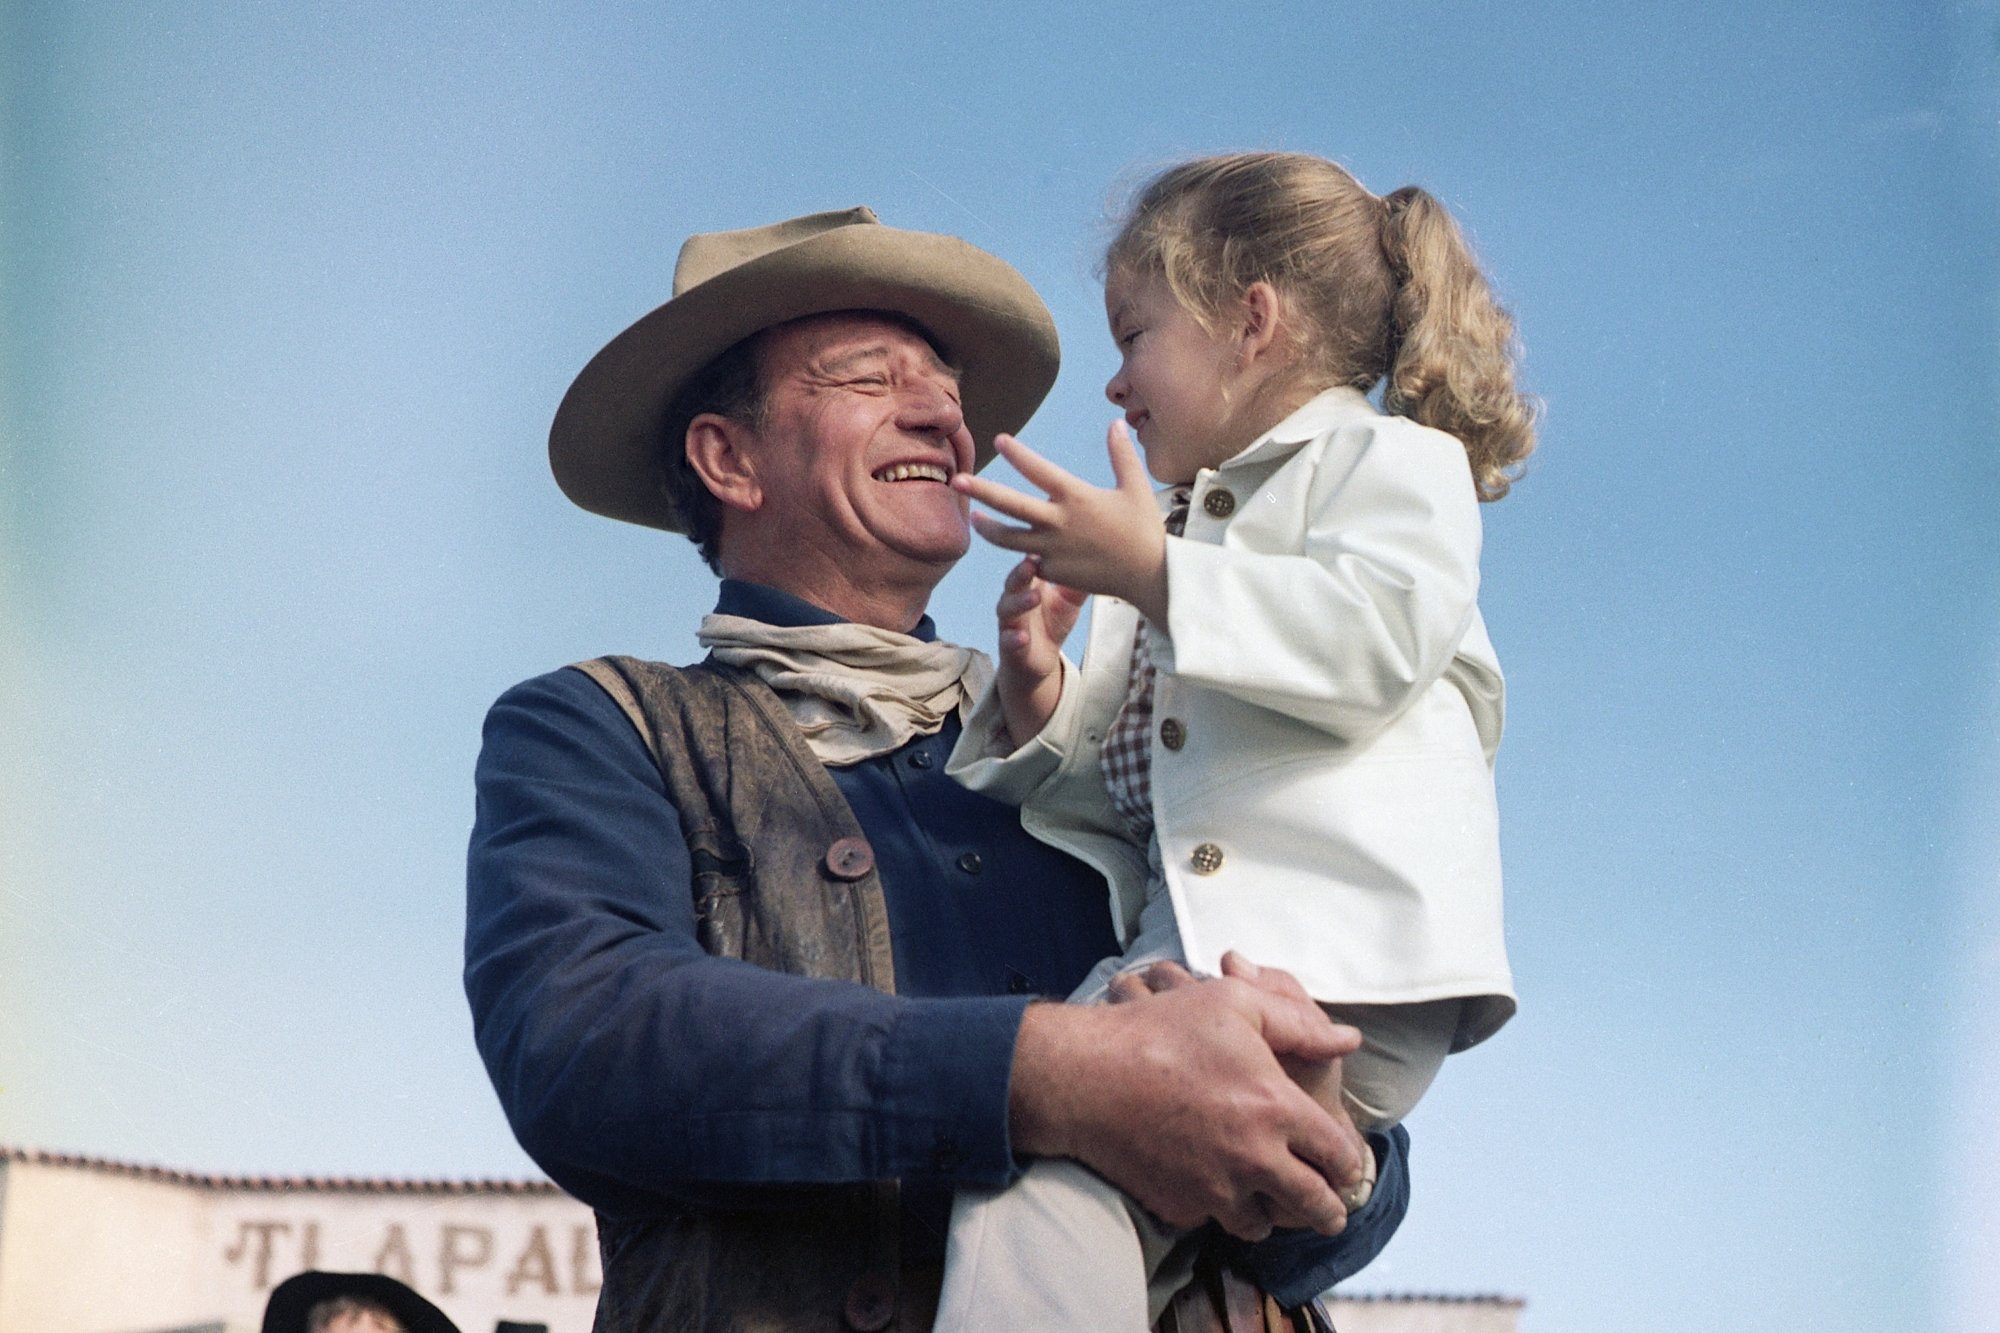 'The Alamo' John Wayne and Aissa Wayne. He holds her in his arms with a big smile on his face. He's wearing a cowboy hat and costume, complete with a scarf and vest.